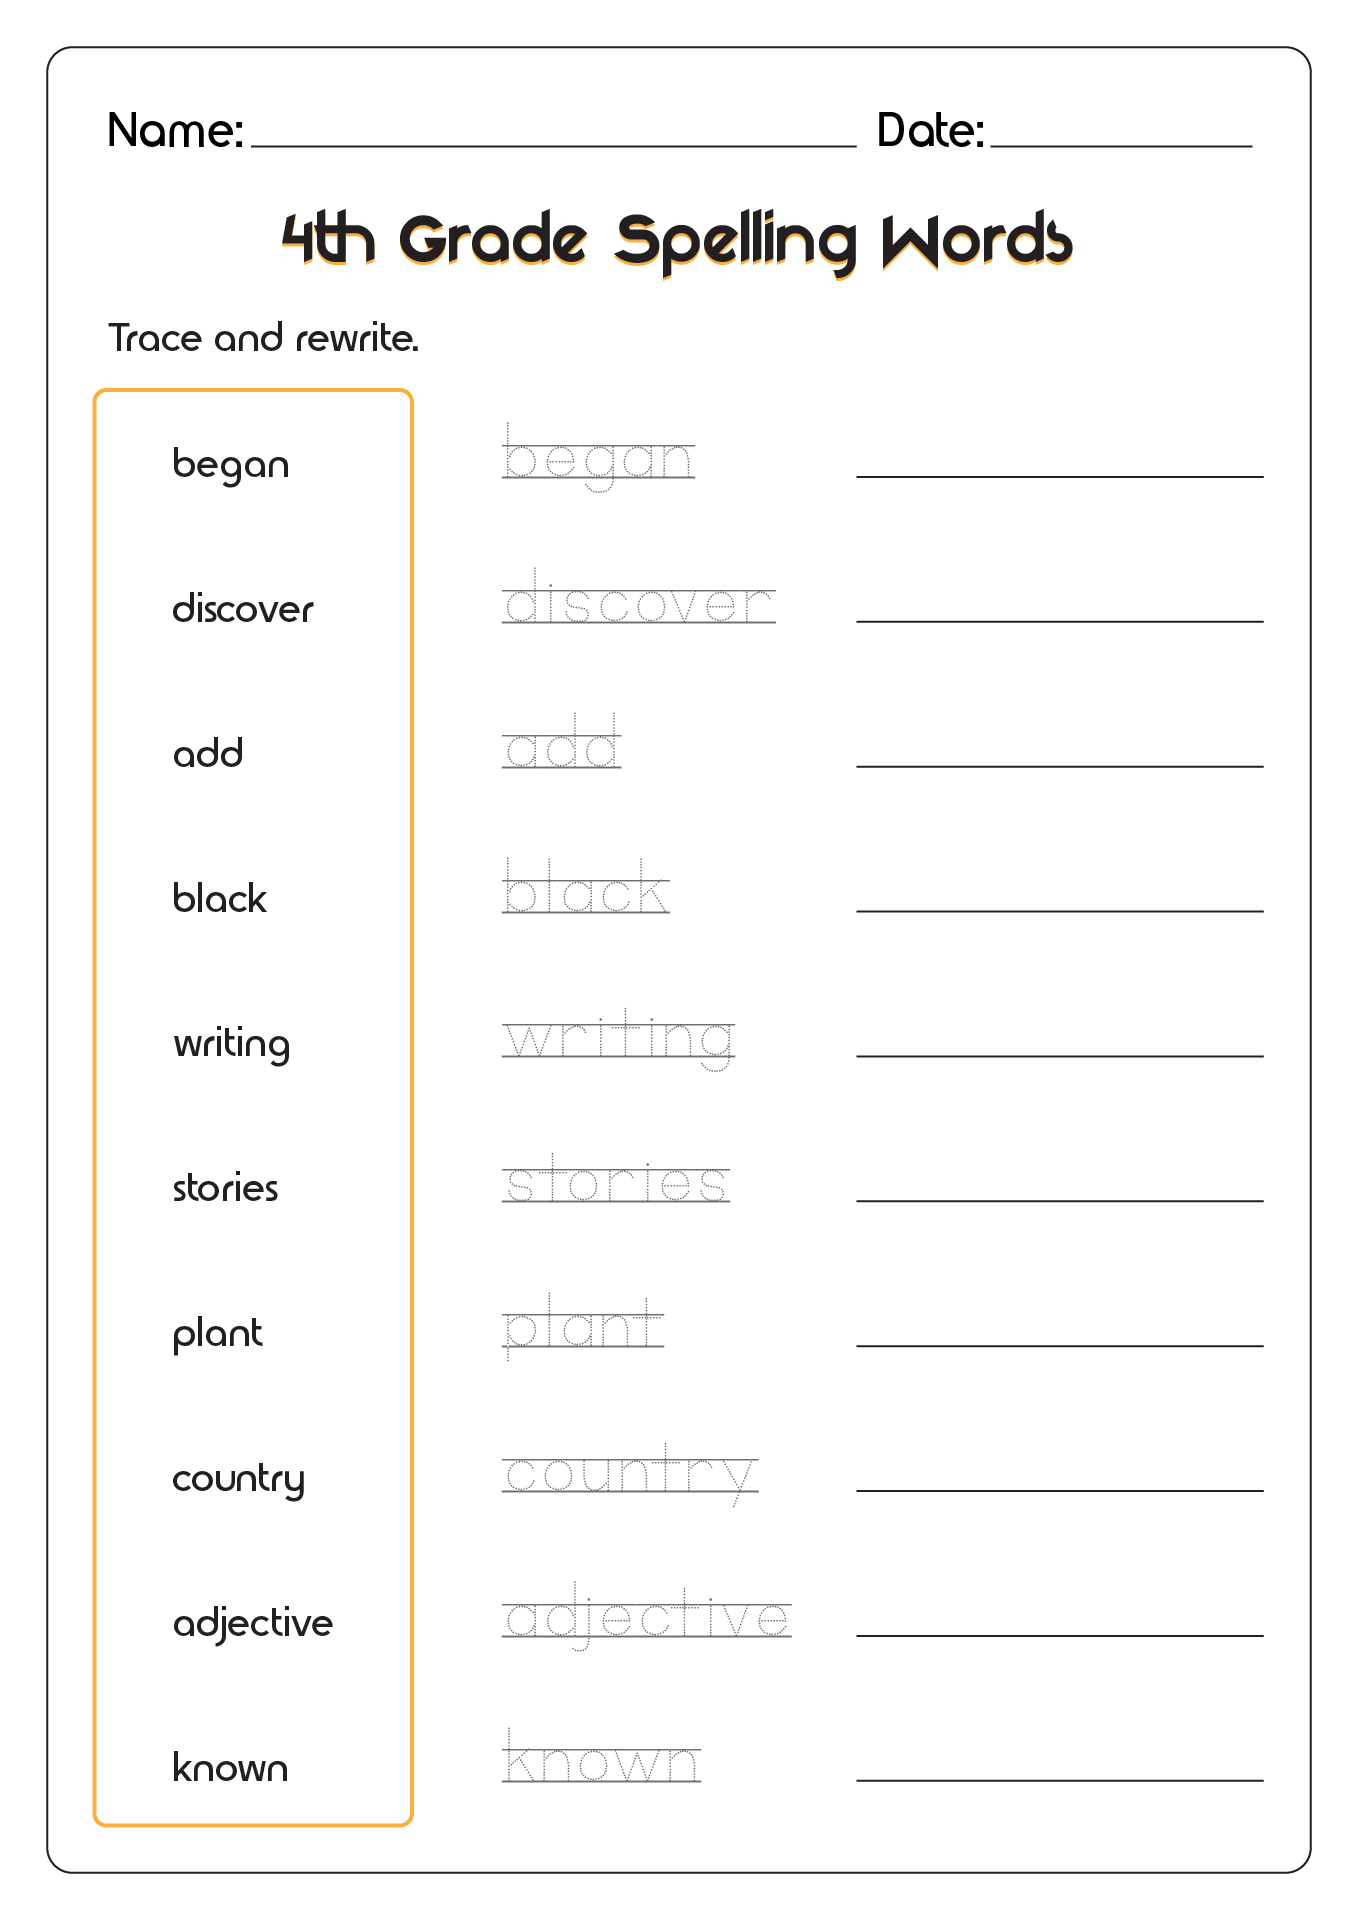 13-best-images-of-spelling-list-worksheets-4th-grade-spelling-word-spelling-worksheets-fourth